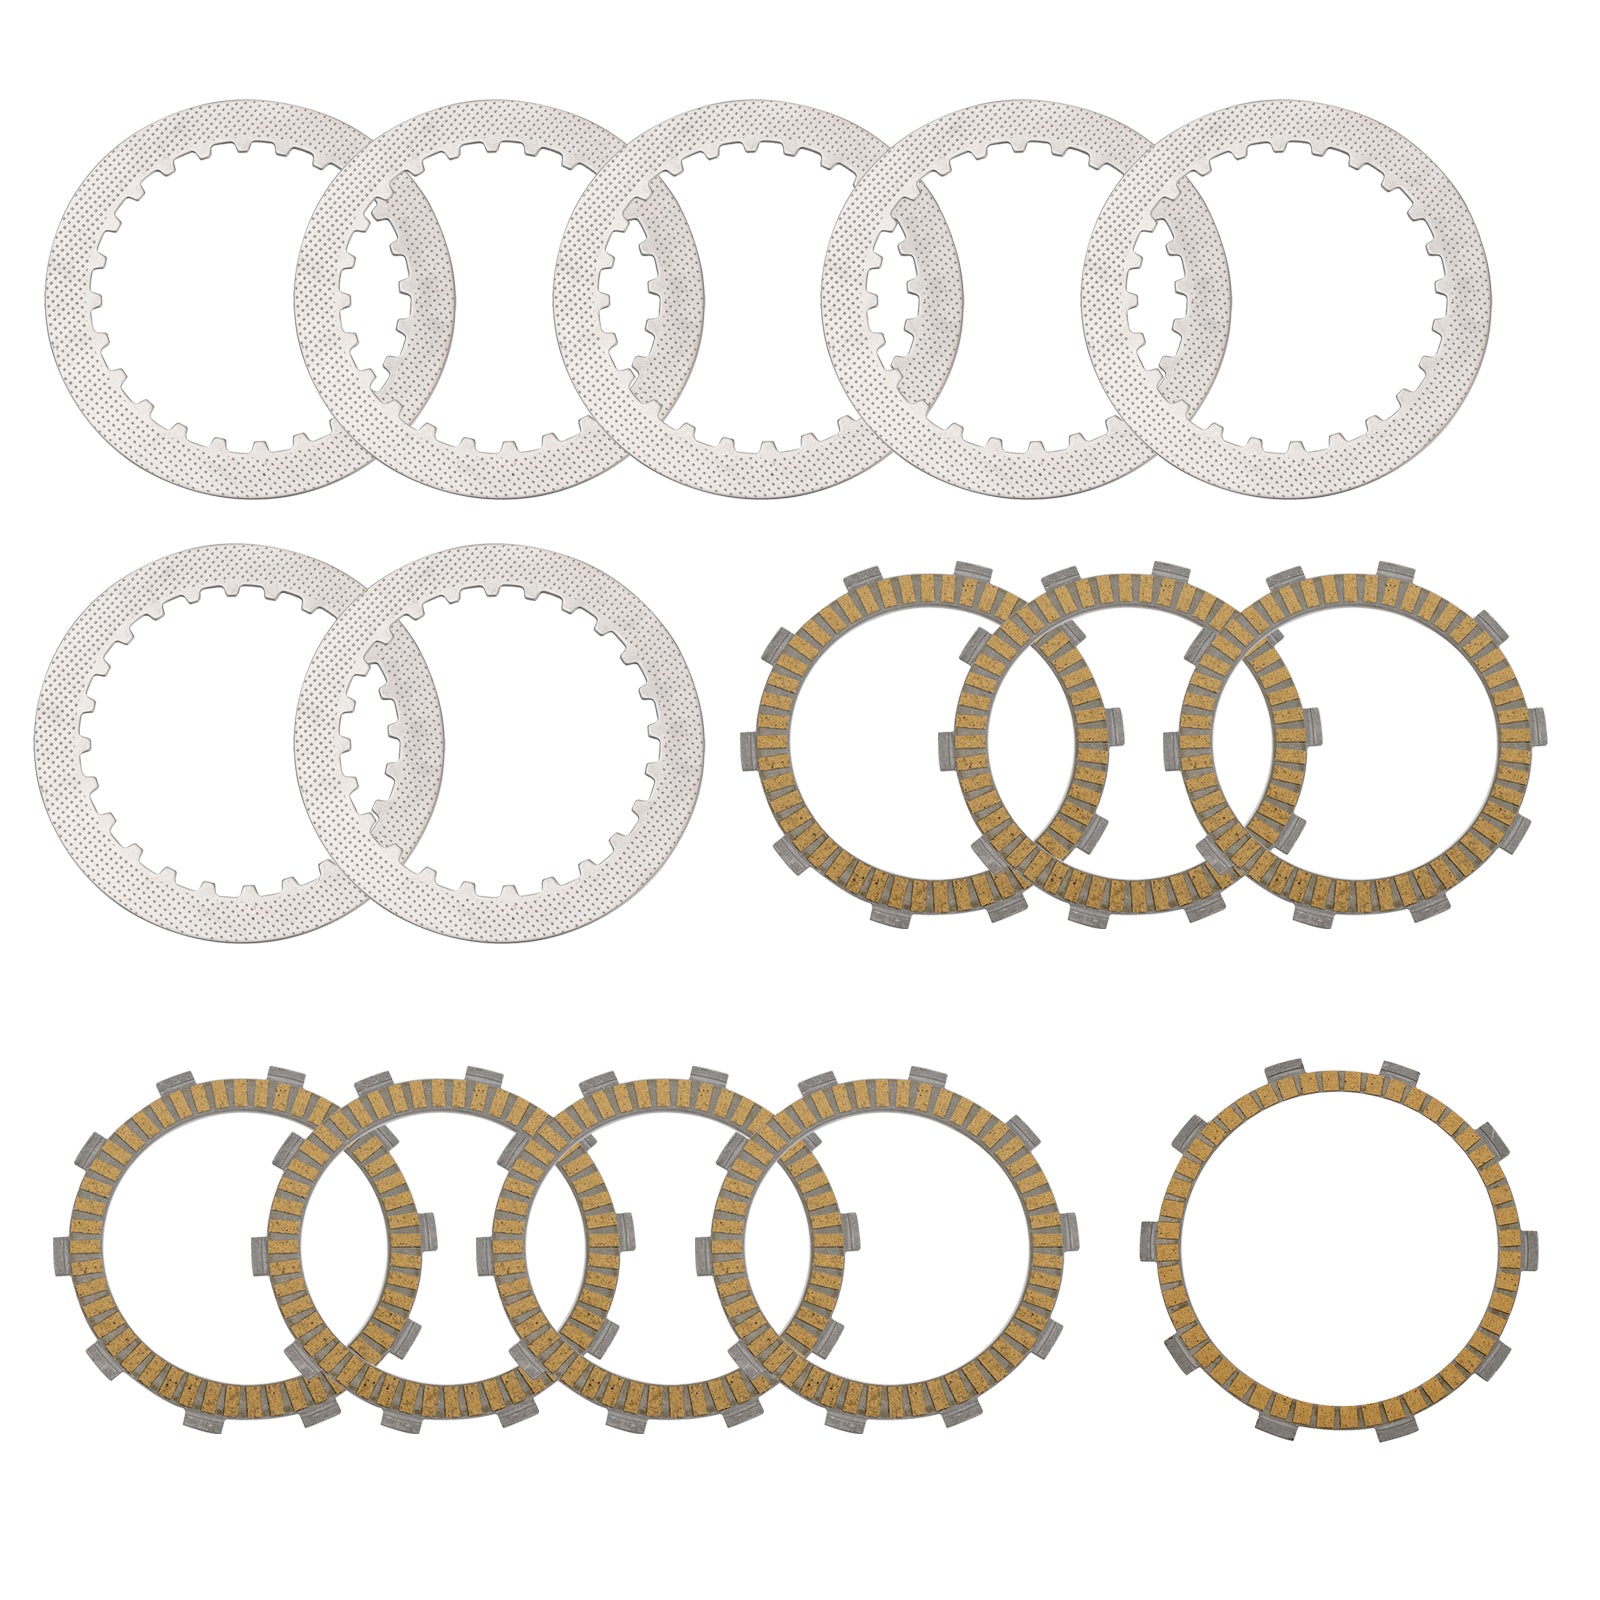 Clutch Friction Plate Kit Set fit for 90232011000 / 90232111000 RC390 2014-2015